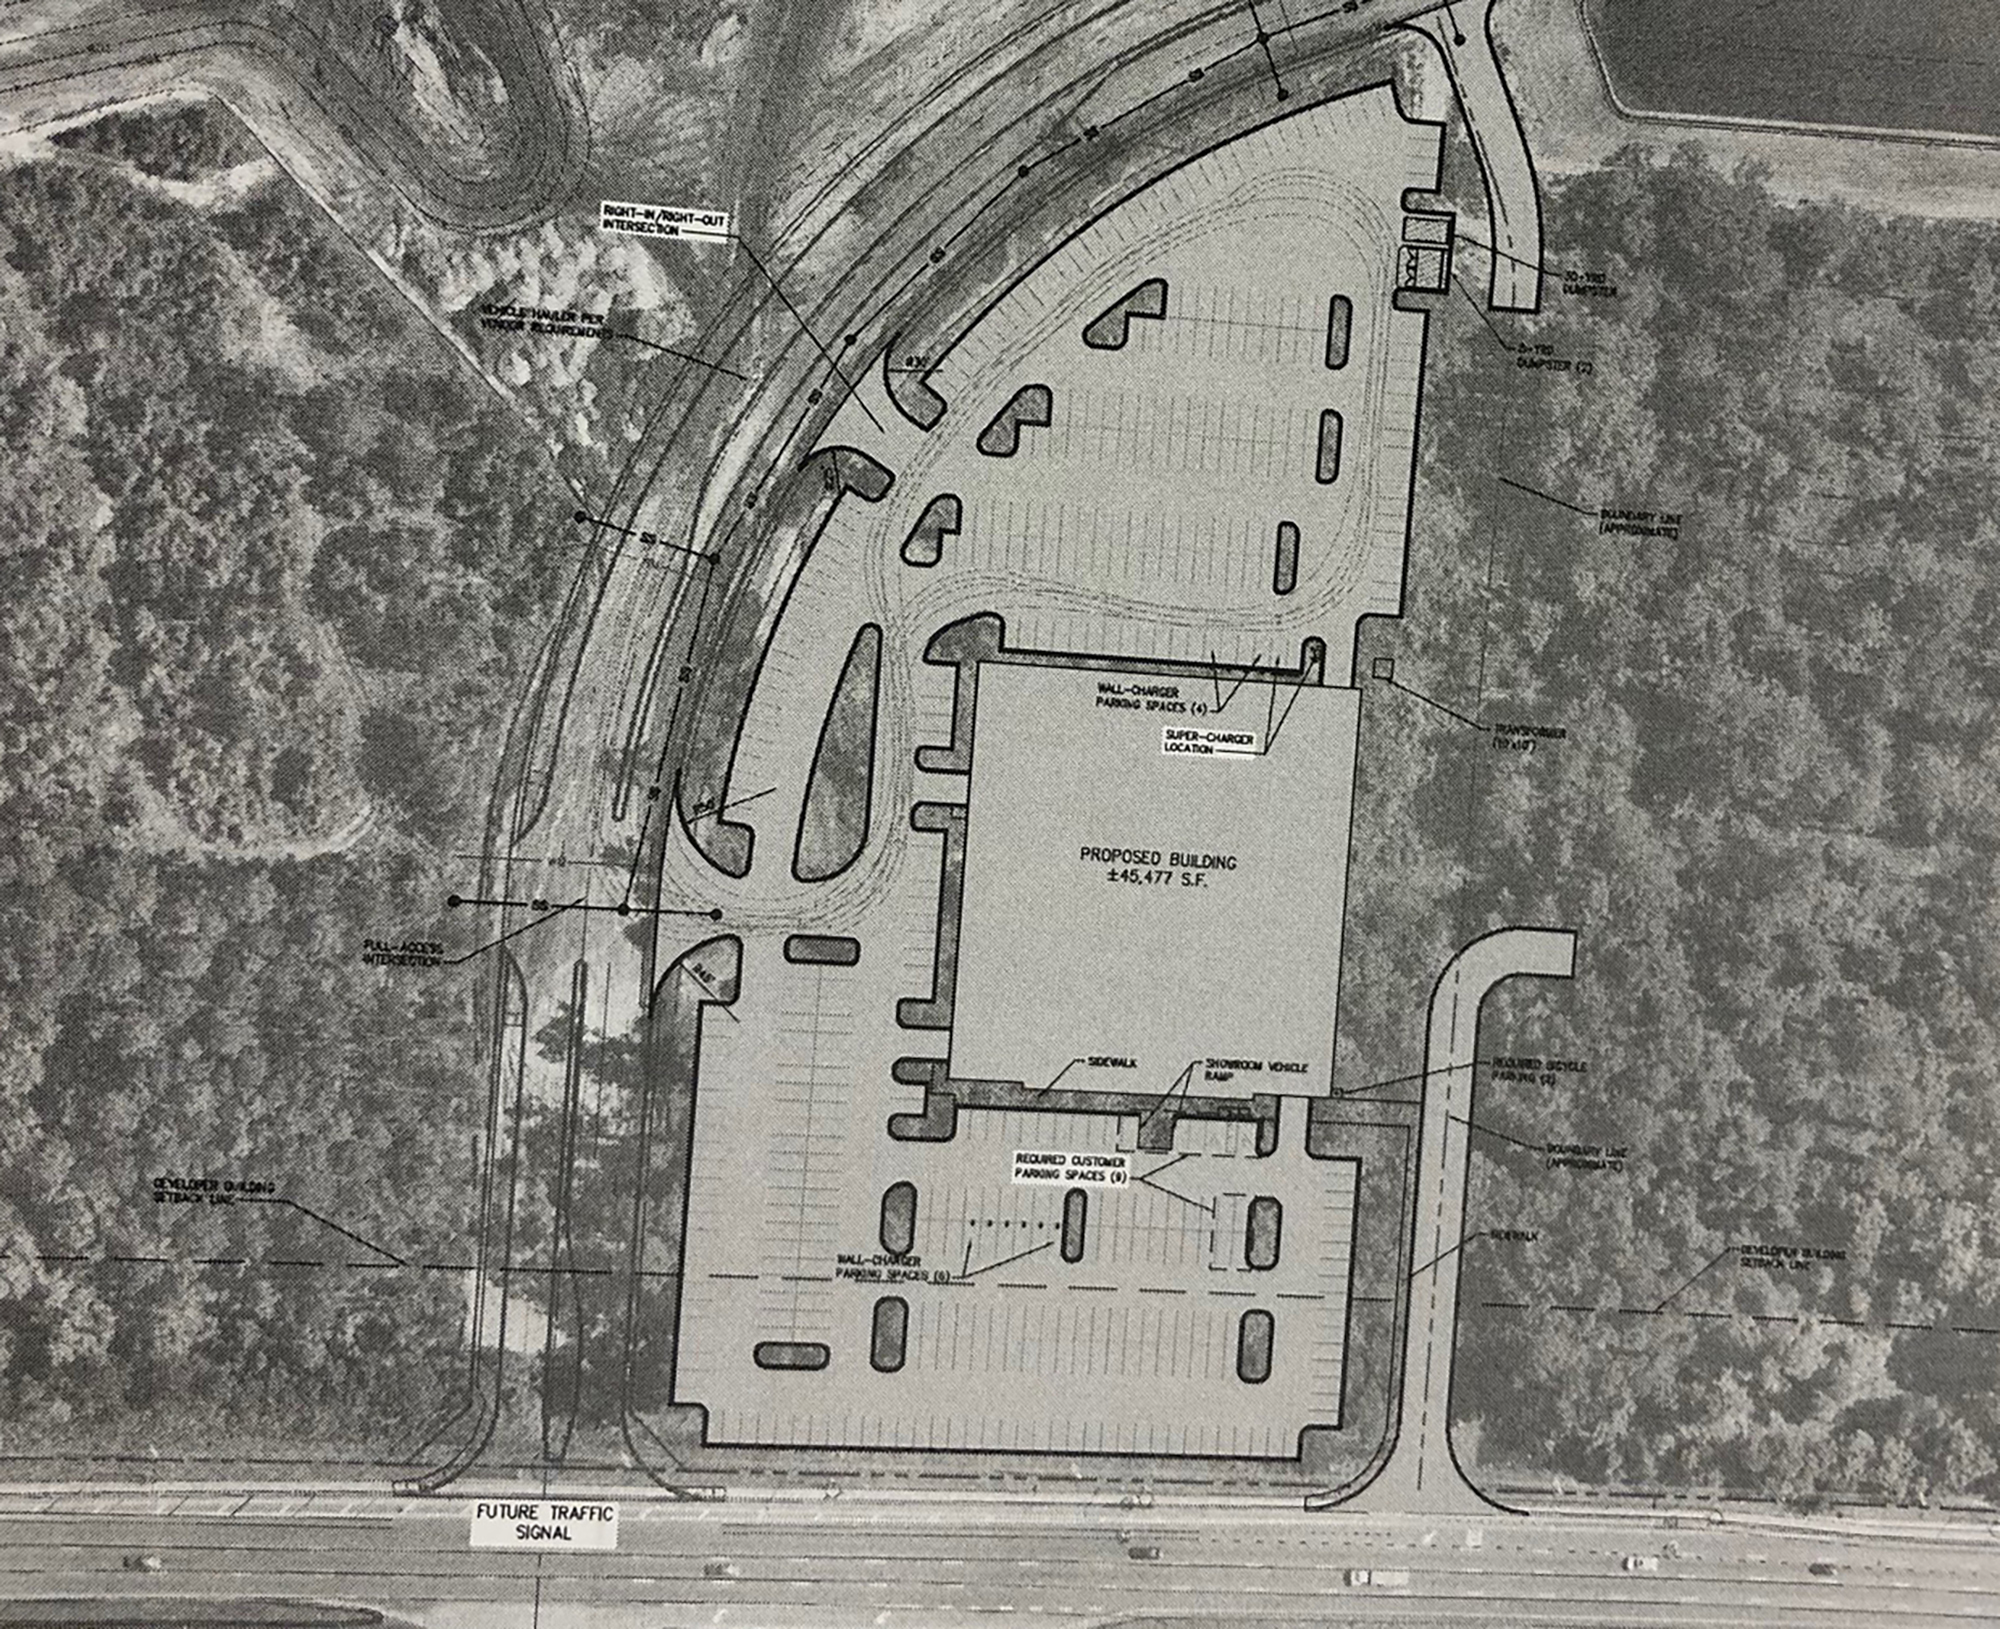 The site plan for the planned Tesla center.